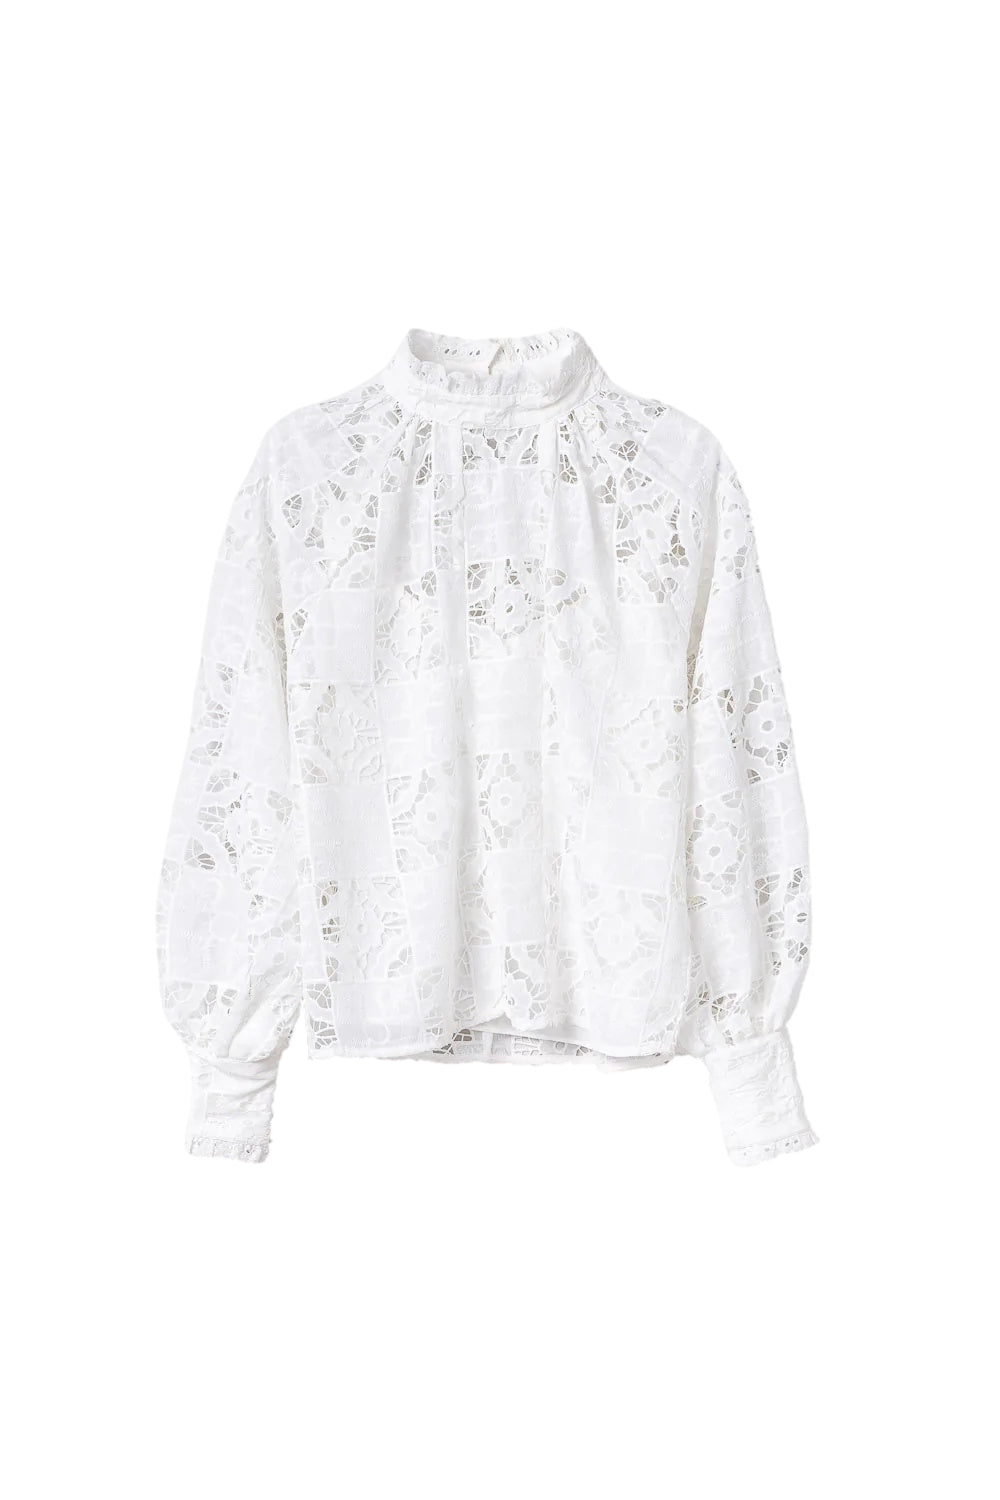 FWSS Broderie Anglaise Top Topp Off-White - [shop.name]